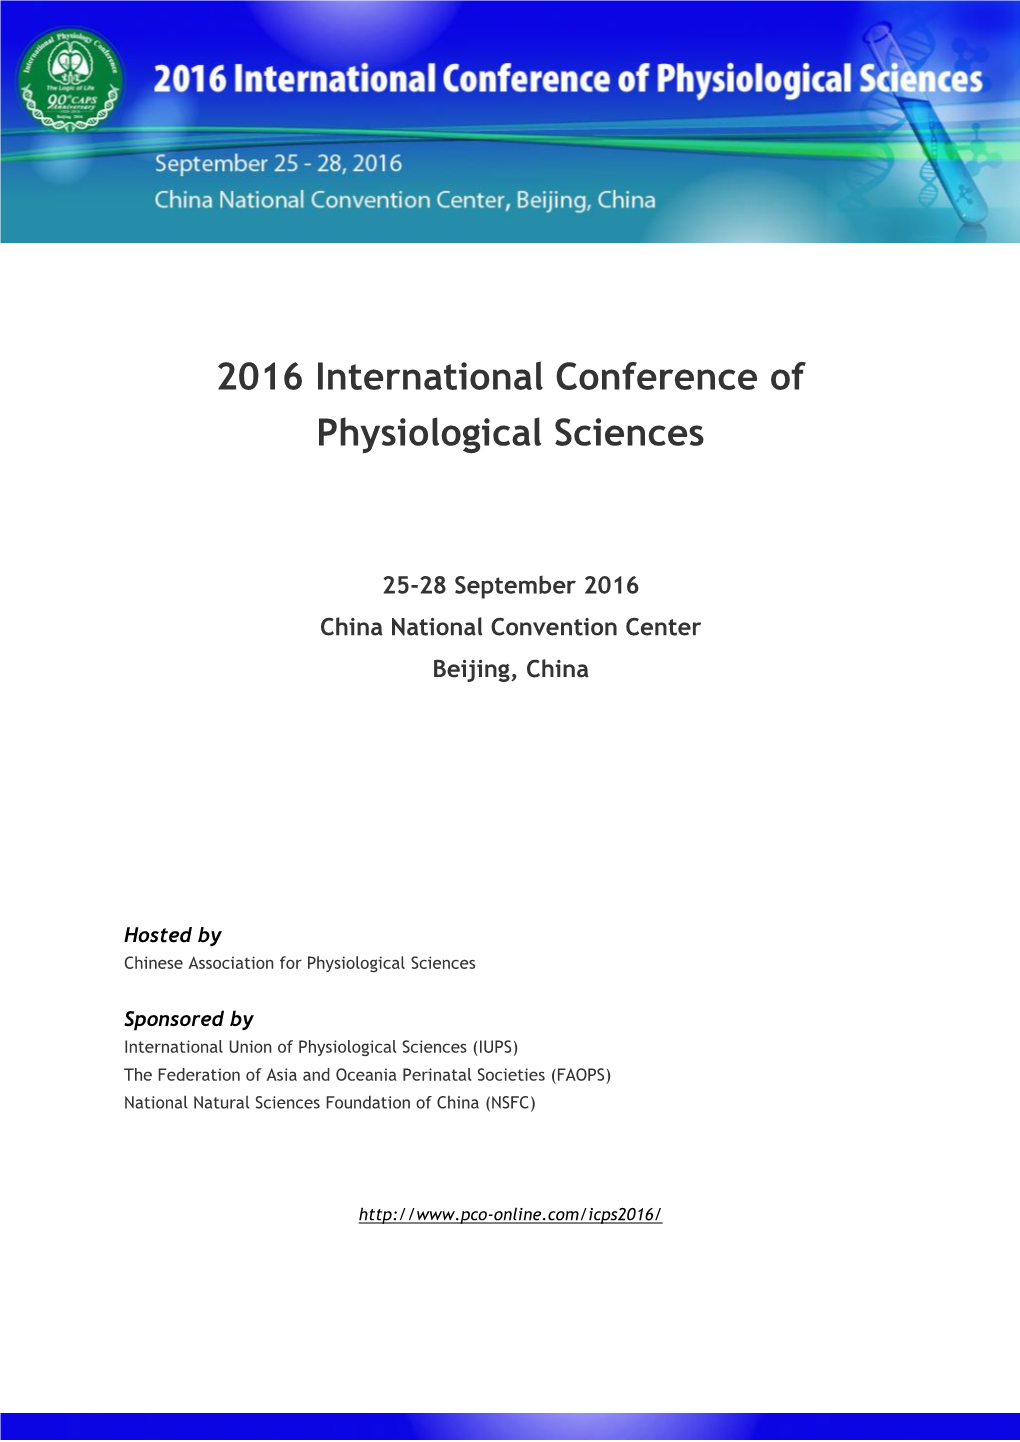 2016 International Conference of Physiological Sciences